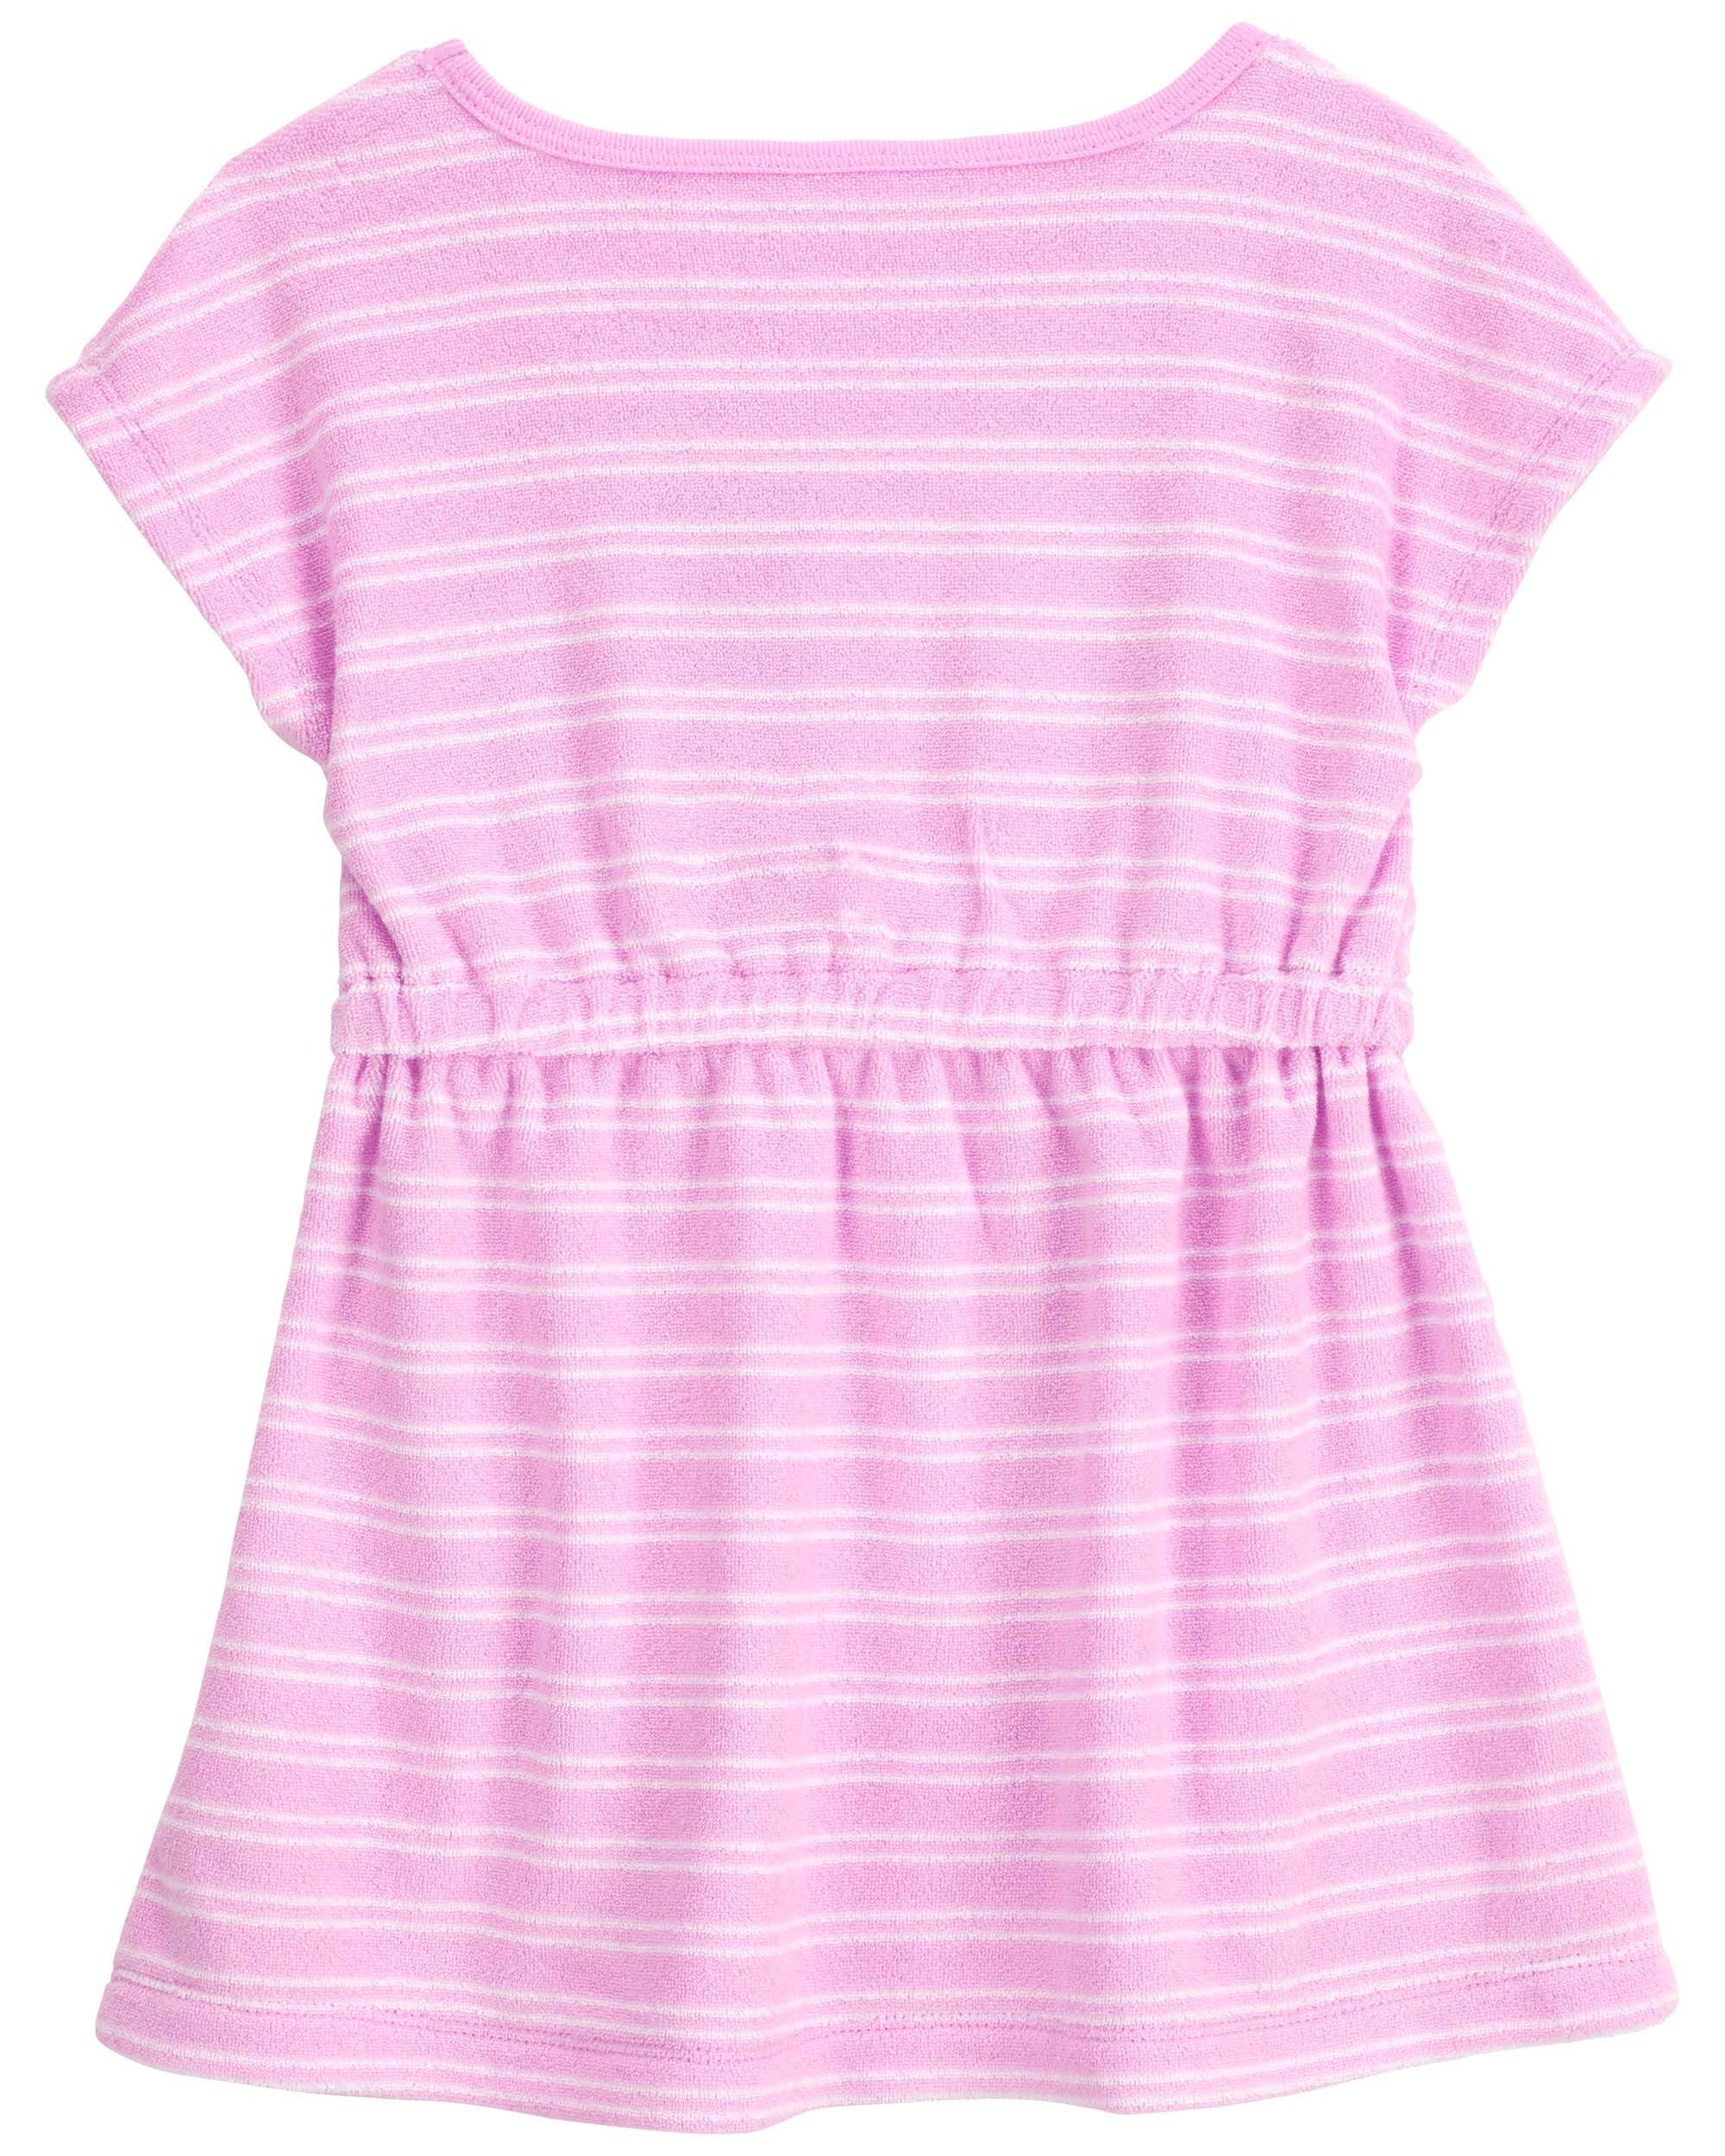 Toddler Striped Terry Swimsuit Cover-Up